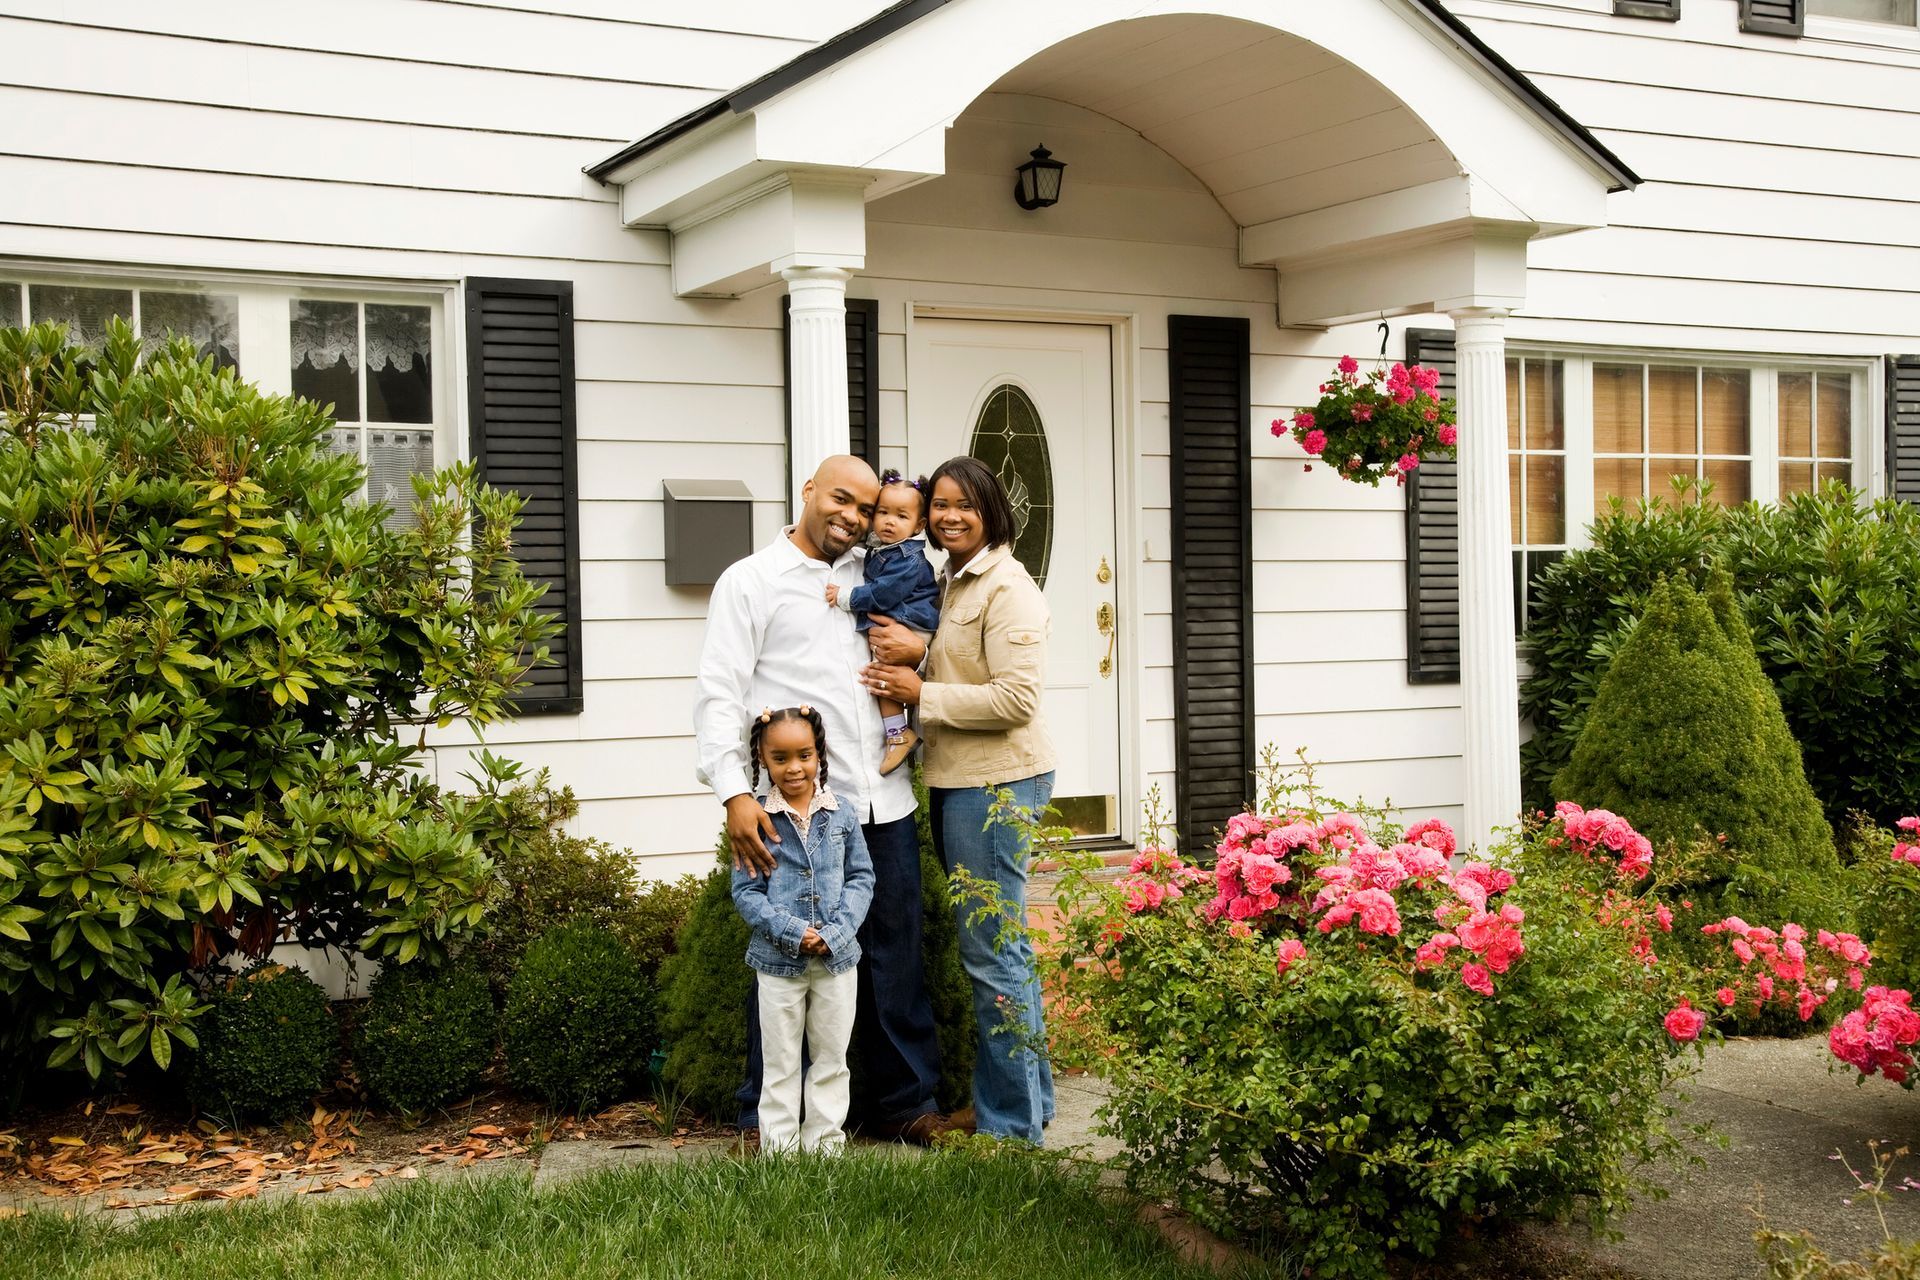 Home Insurance in Lincoln NE from Advantage Insurance Agency